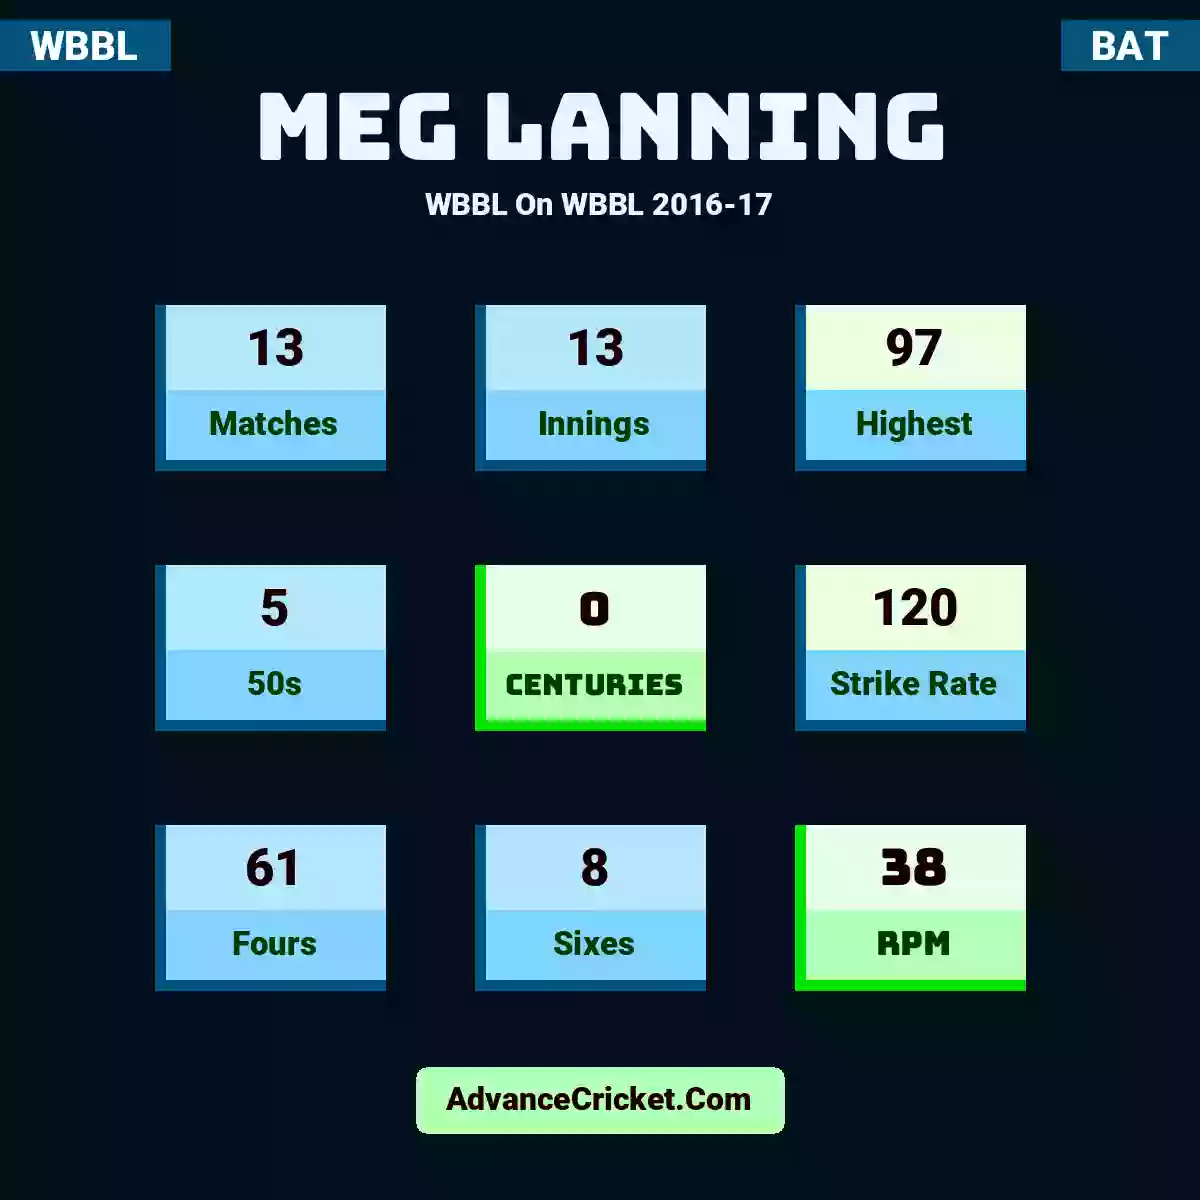 Meg Lanning WBBL  On WBBL 2016-17, Meg Lanning played 13 matches, scored 97 runs as highest, 5 half-centuries, and 0 centuries, with a strike rate of 120. M.Lanning hit 61 fours and 8 sixes, with an RPM of 38.